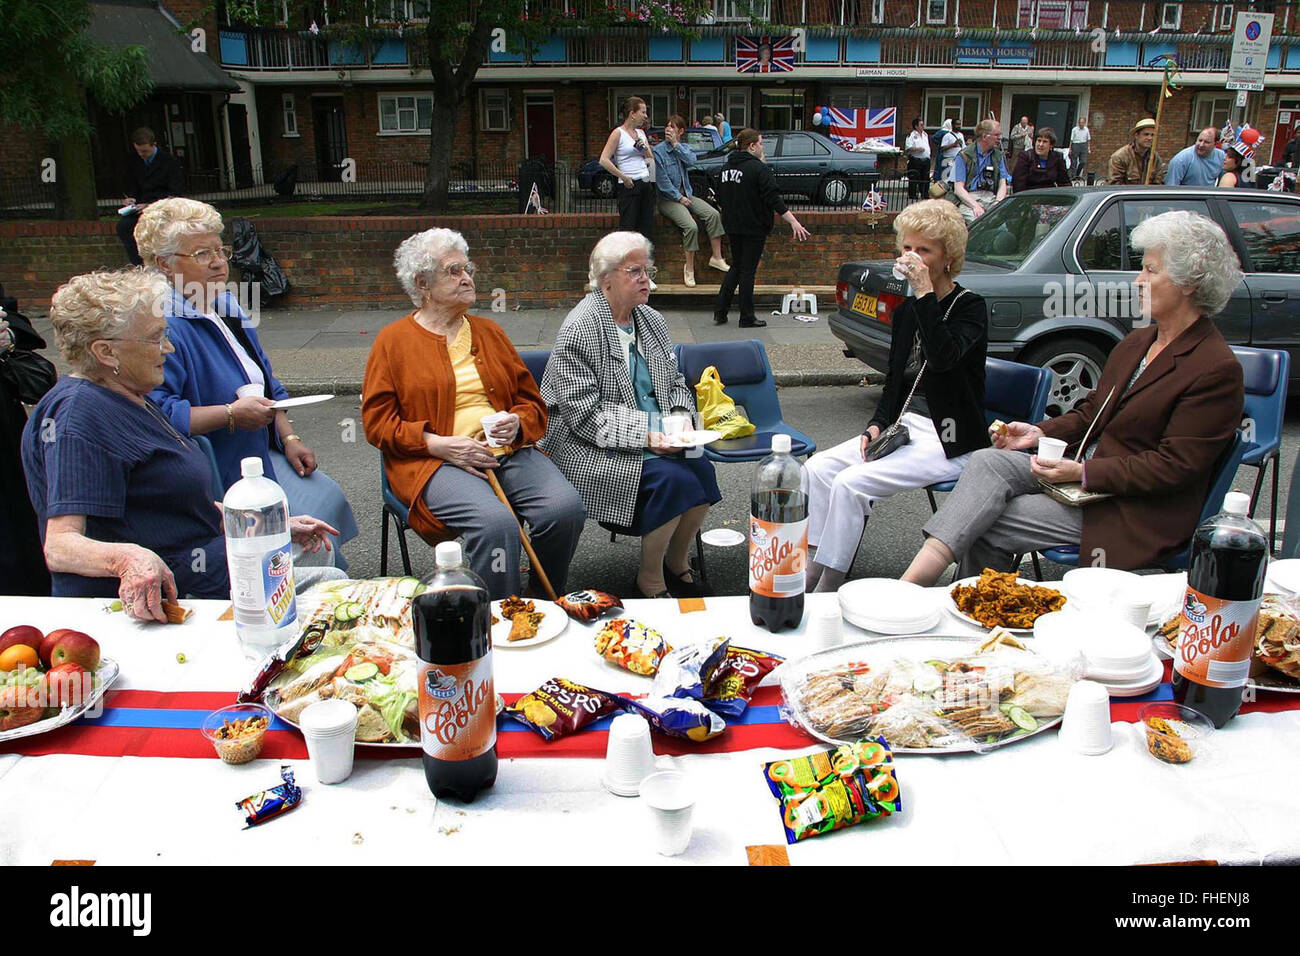 Residents at a special buffet during a Golden Jubilee street party in Jubilee Street in the Stepney Green area of east London, where hundreds turned out to celebrate the 50 year reign of Queen Elizabeth II. Celebrations took place across the United Kingdom with the centrepiece a parade and fireworks at Buckingham Palace, the Queen's London residency. Queen Elizabeth ascended to the British throne in 1952 upon the death of her father, King George VI. Stock Photo